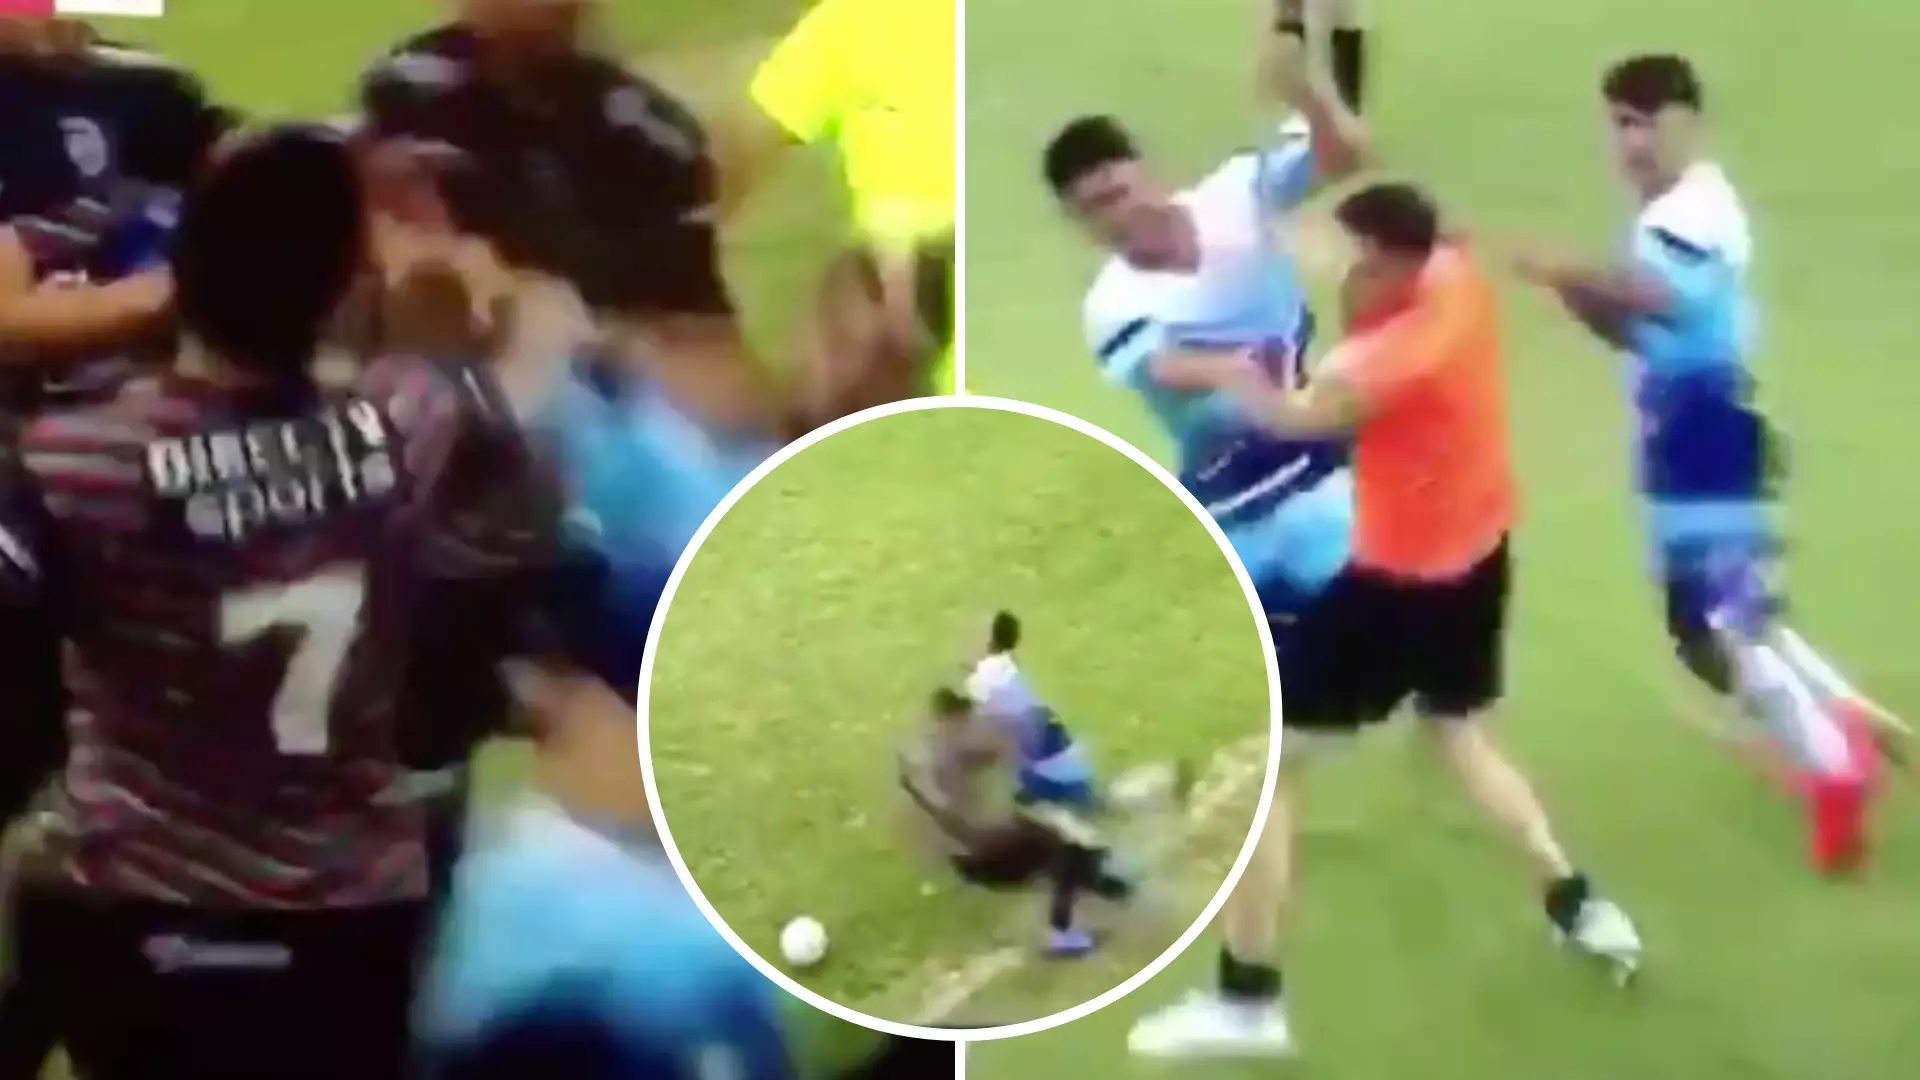 Argentine Footballer’s Worst Tackle Of The Year Contender Sparks An All-Out Brawl At Match